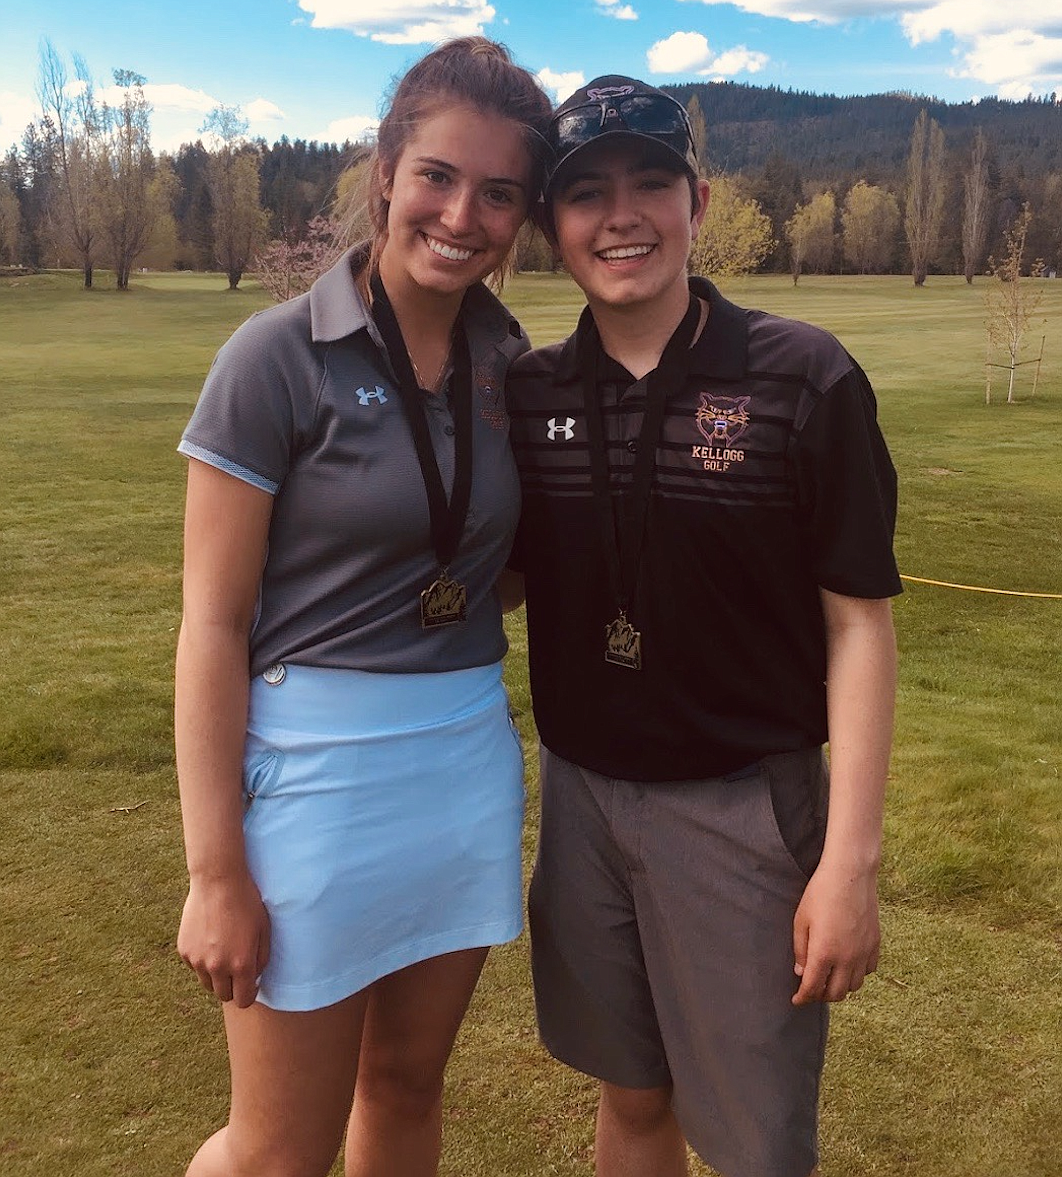 April: Siblings Kat and Archie Rauenhorst were nominated for awards at the (now canceled) North Idaho Hall of Fame Banquet. The pair were just two of six athletes from the Silver Valley who were nominated for various awards.